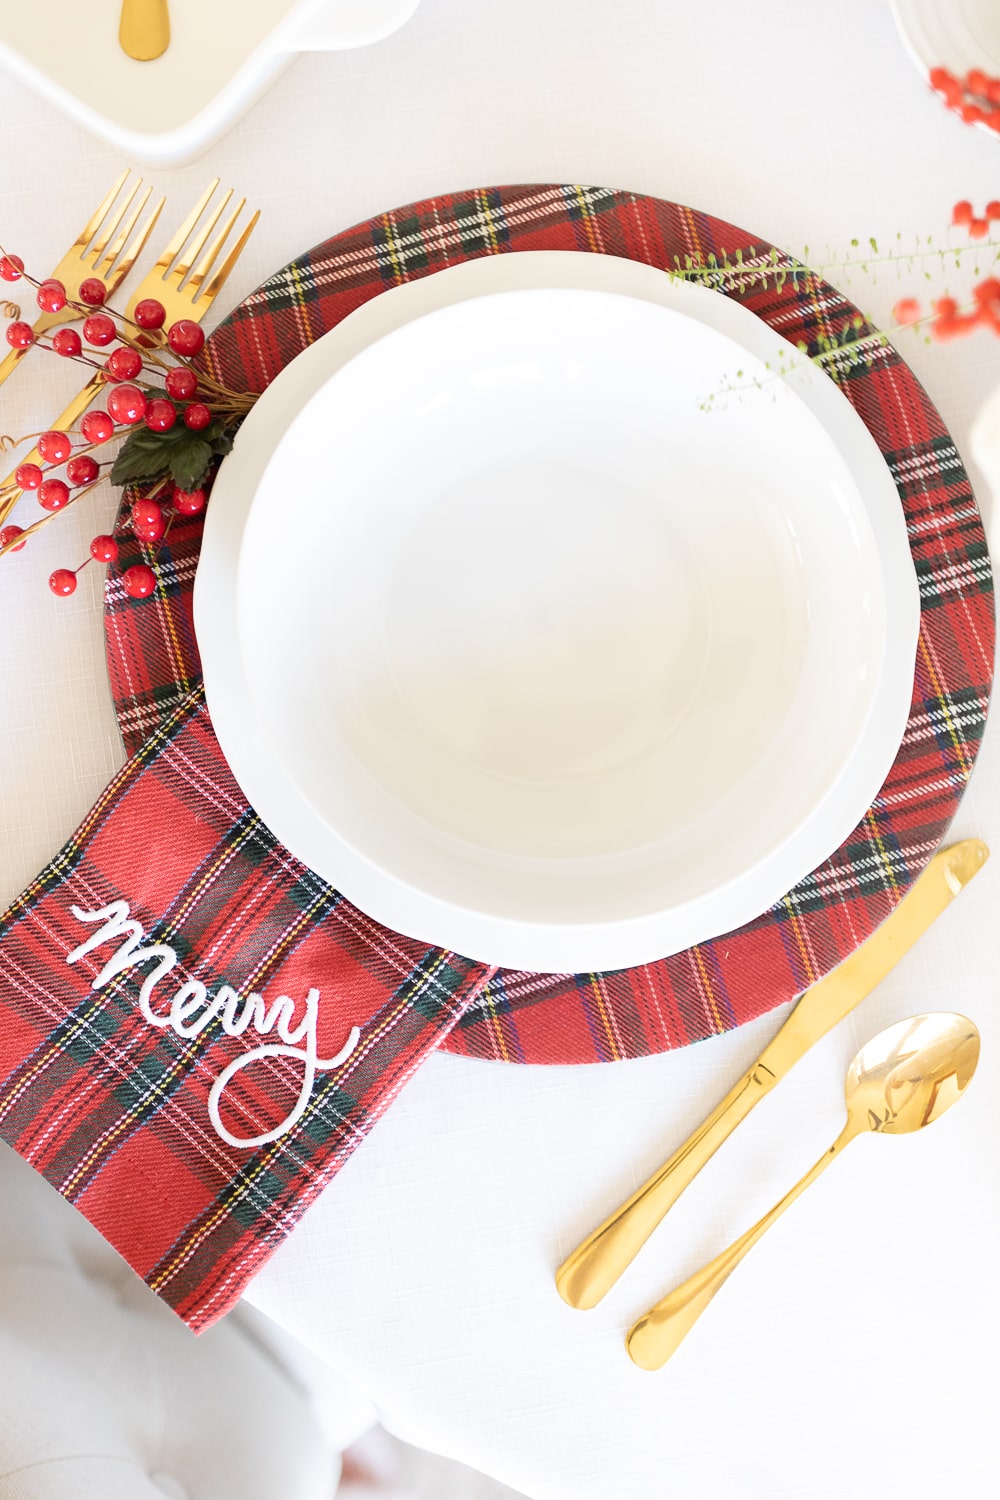 Mud Pie Christmas napkins and chargers styled in a Christmas tablescape by blogger Stephanie Ziajka on Diary of a Debutante